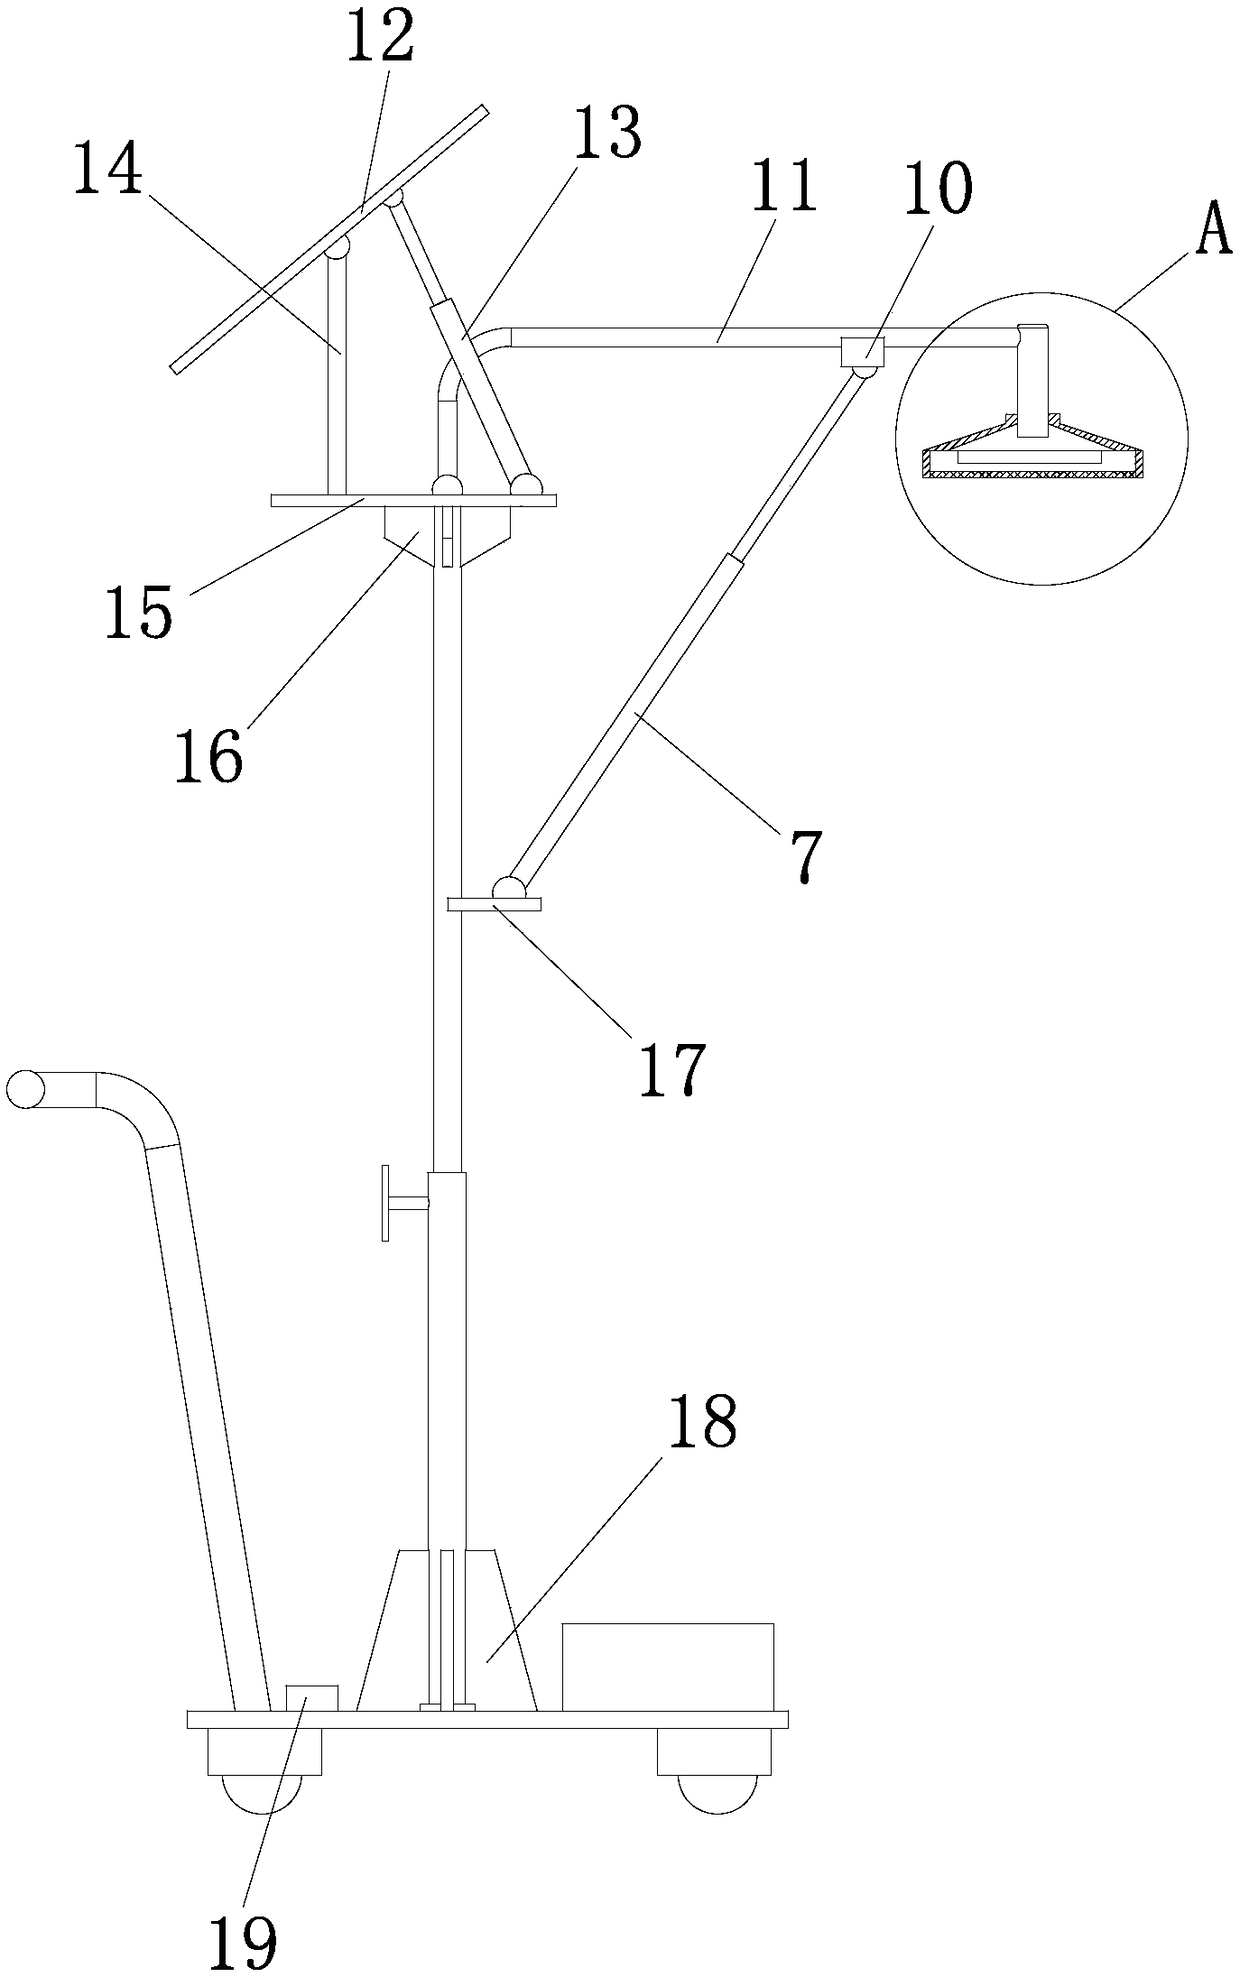 Yard lamp with function of adjusting angle of lamp pole support